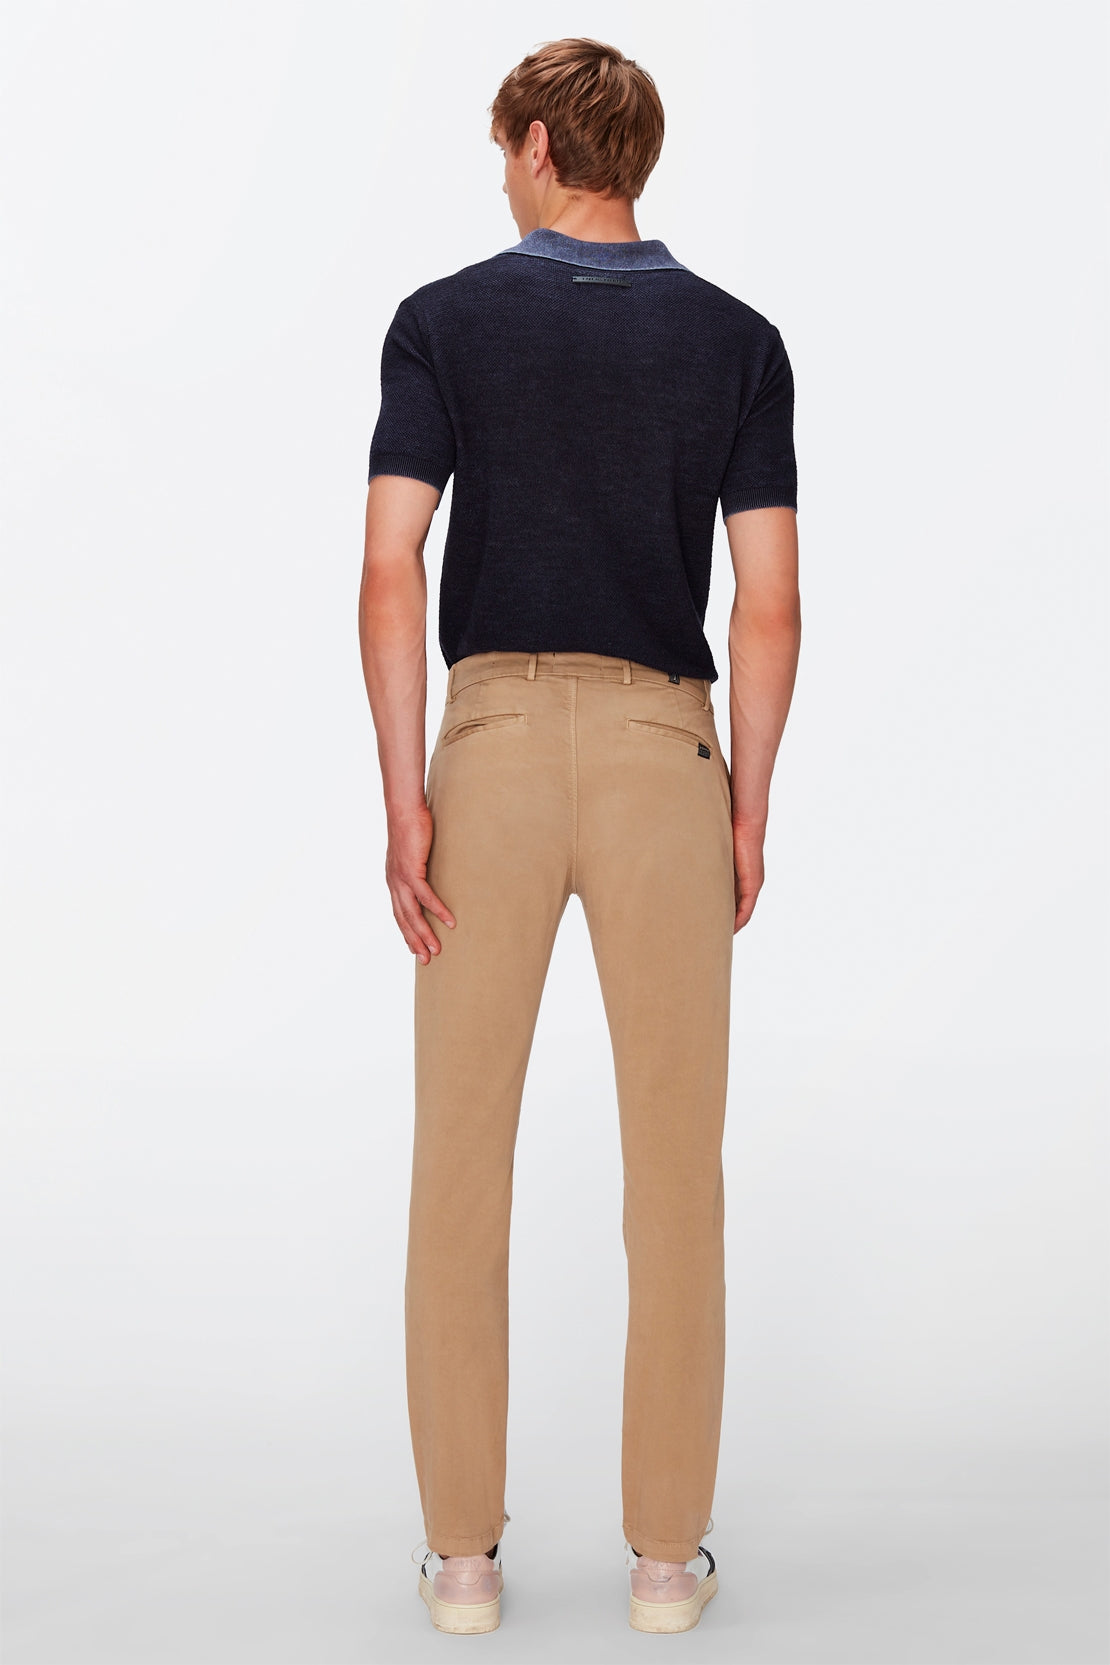 Slimmy Chino Tap. Luxe Performance Sateen Bamboo